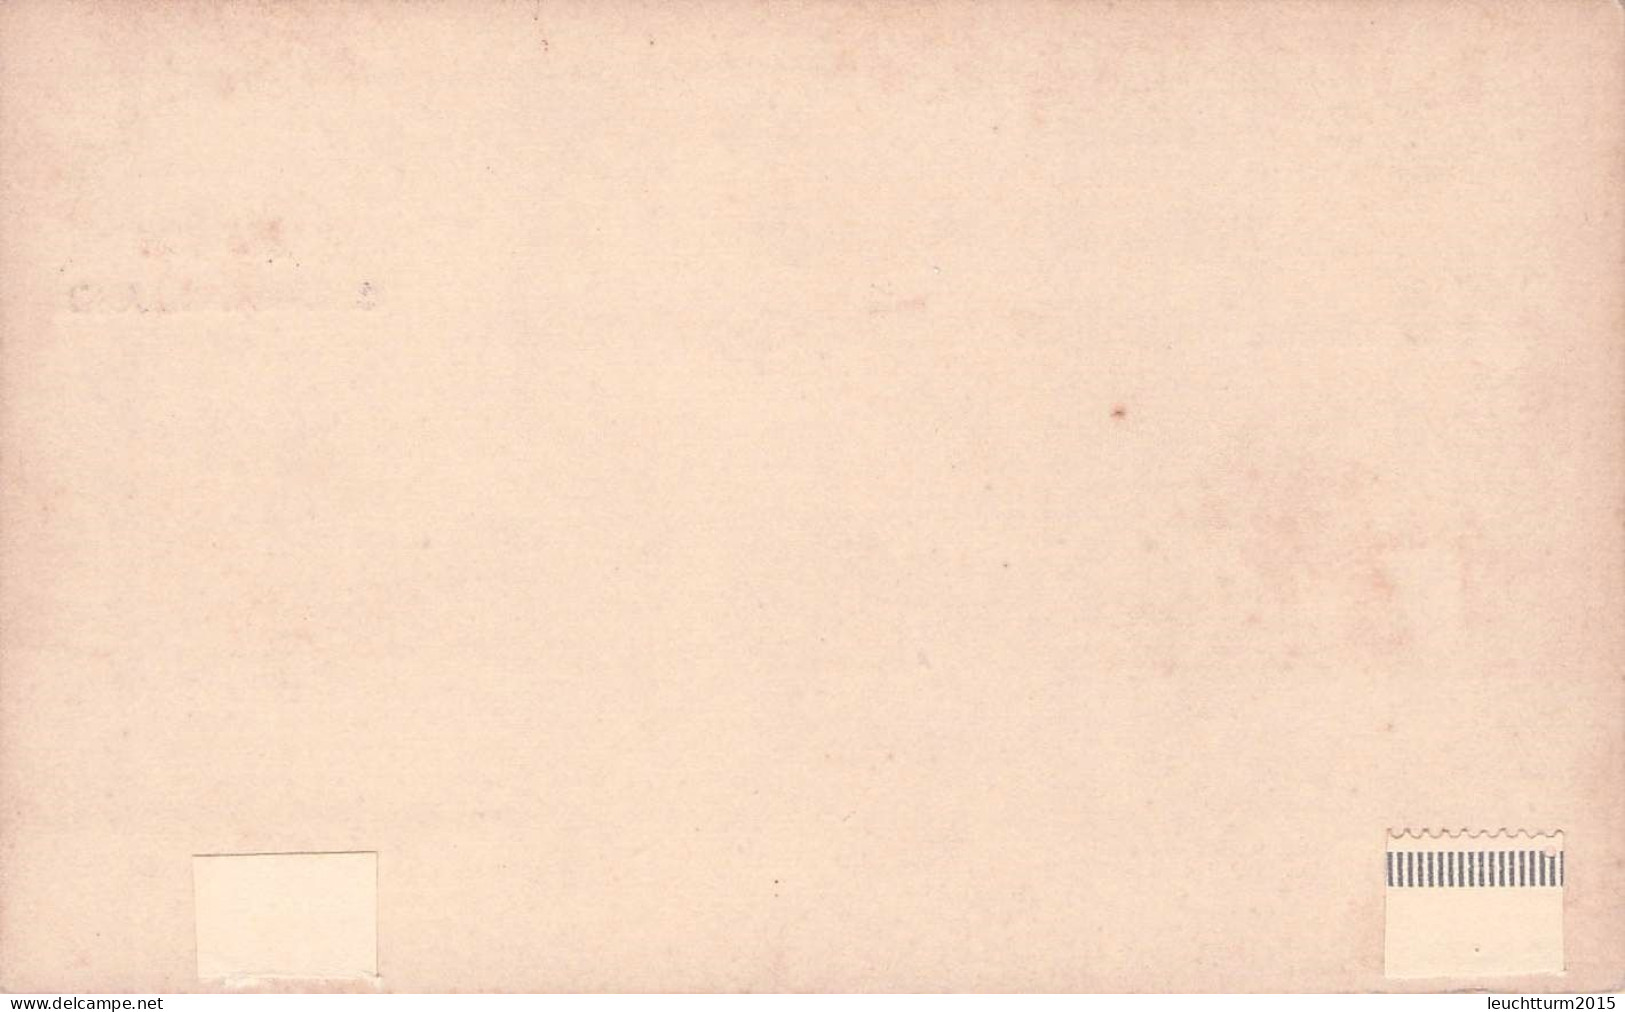 BRITISH BECHUANALAND - POSTCARD ONE PENNY Unc /ZL469 - 1885-1895 Crown Colony